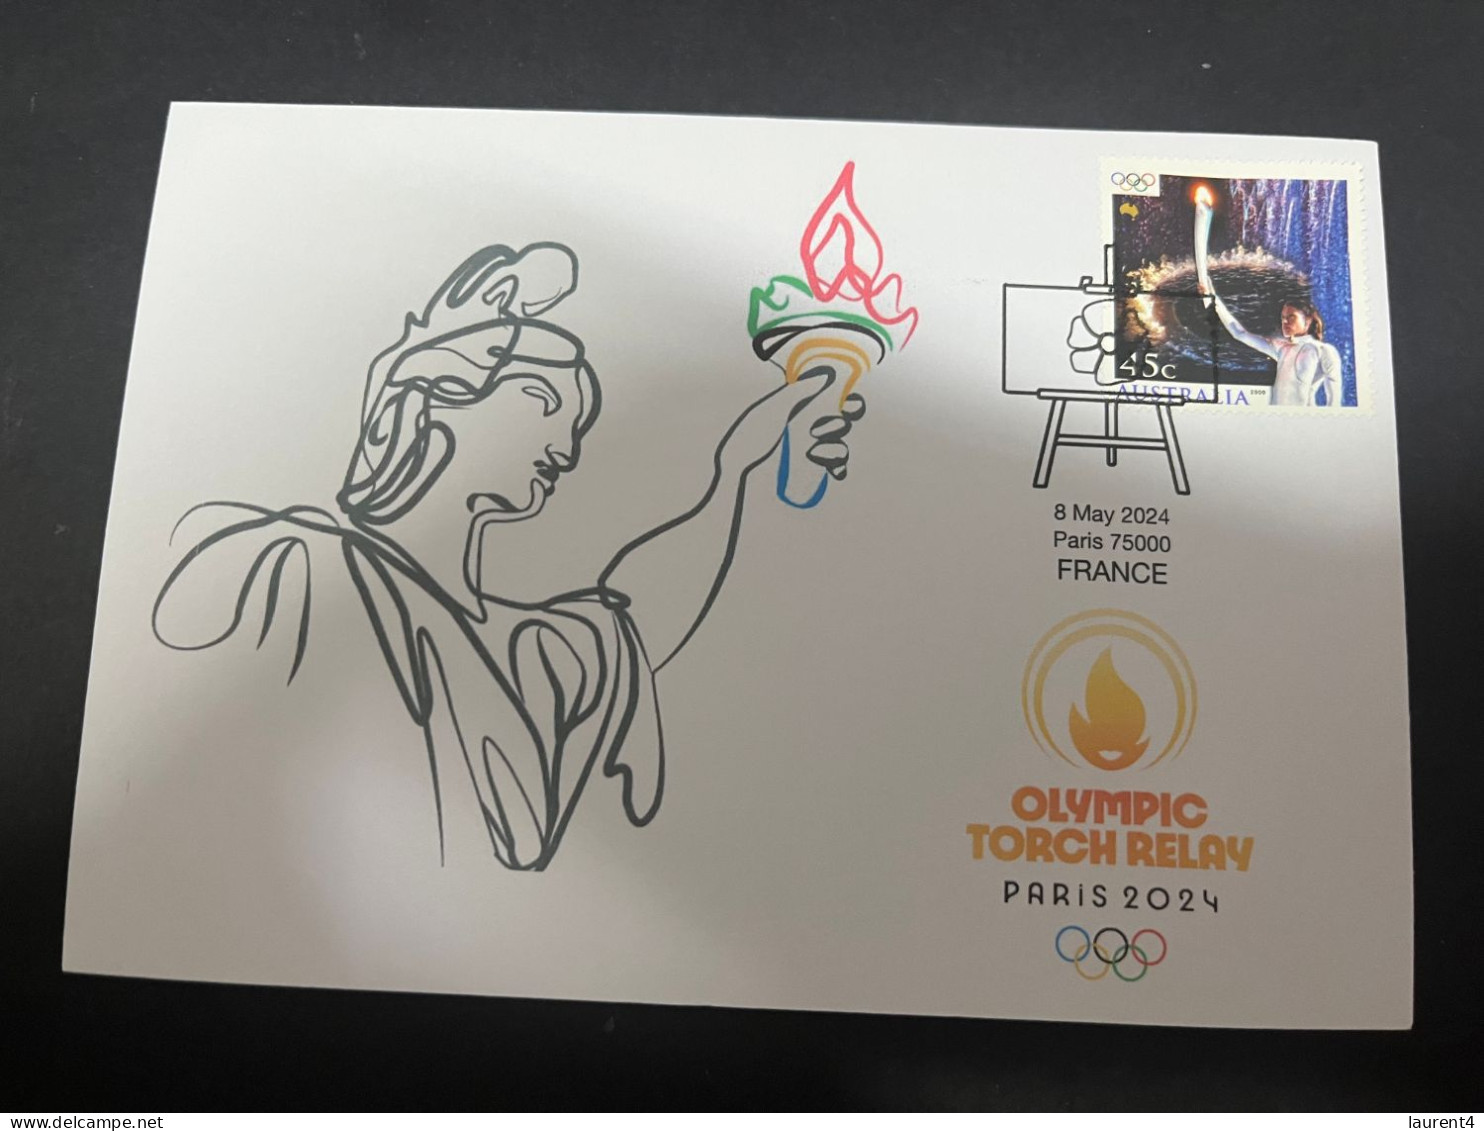 12-5-2024 (5 Z 2) Paris Olympic Games 2024 - Torch Relay In France (with Olympic Torch Relay Sydney Cathy Freeman Stamp) - Eté 2024 : Paris